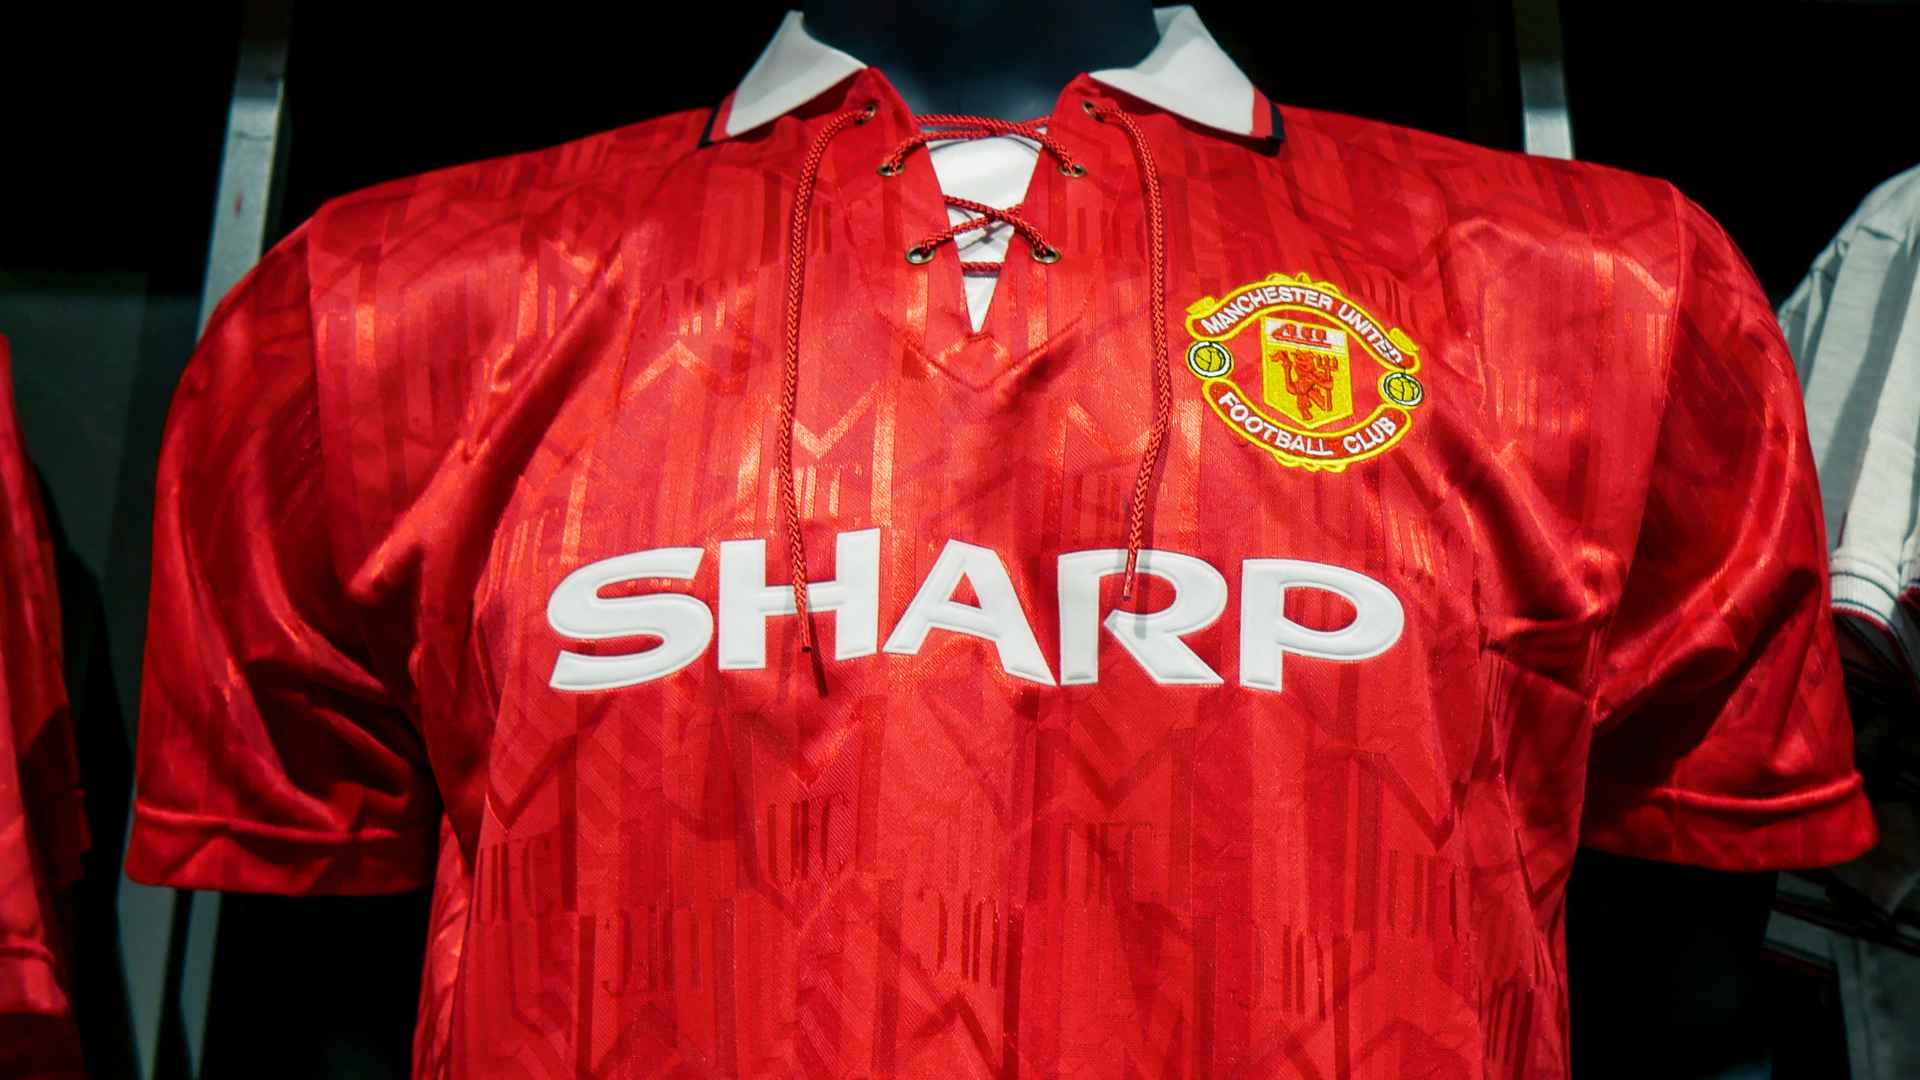 Manchester United away shirt 1990-1992 in Large